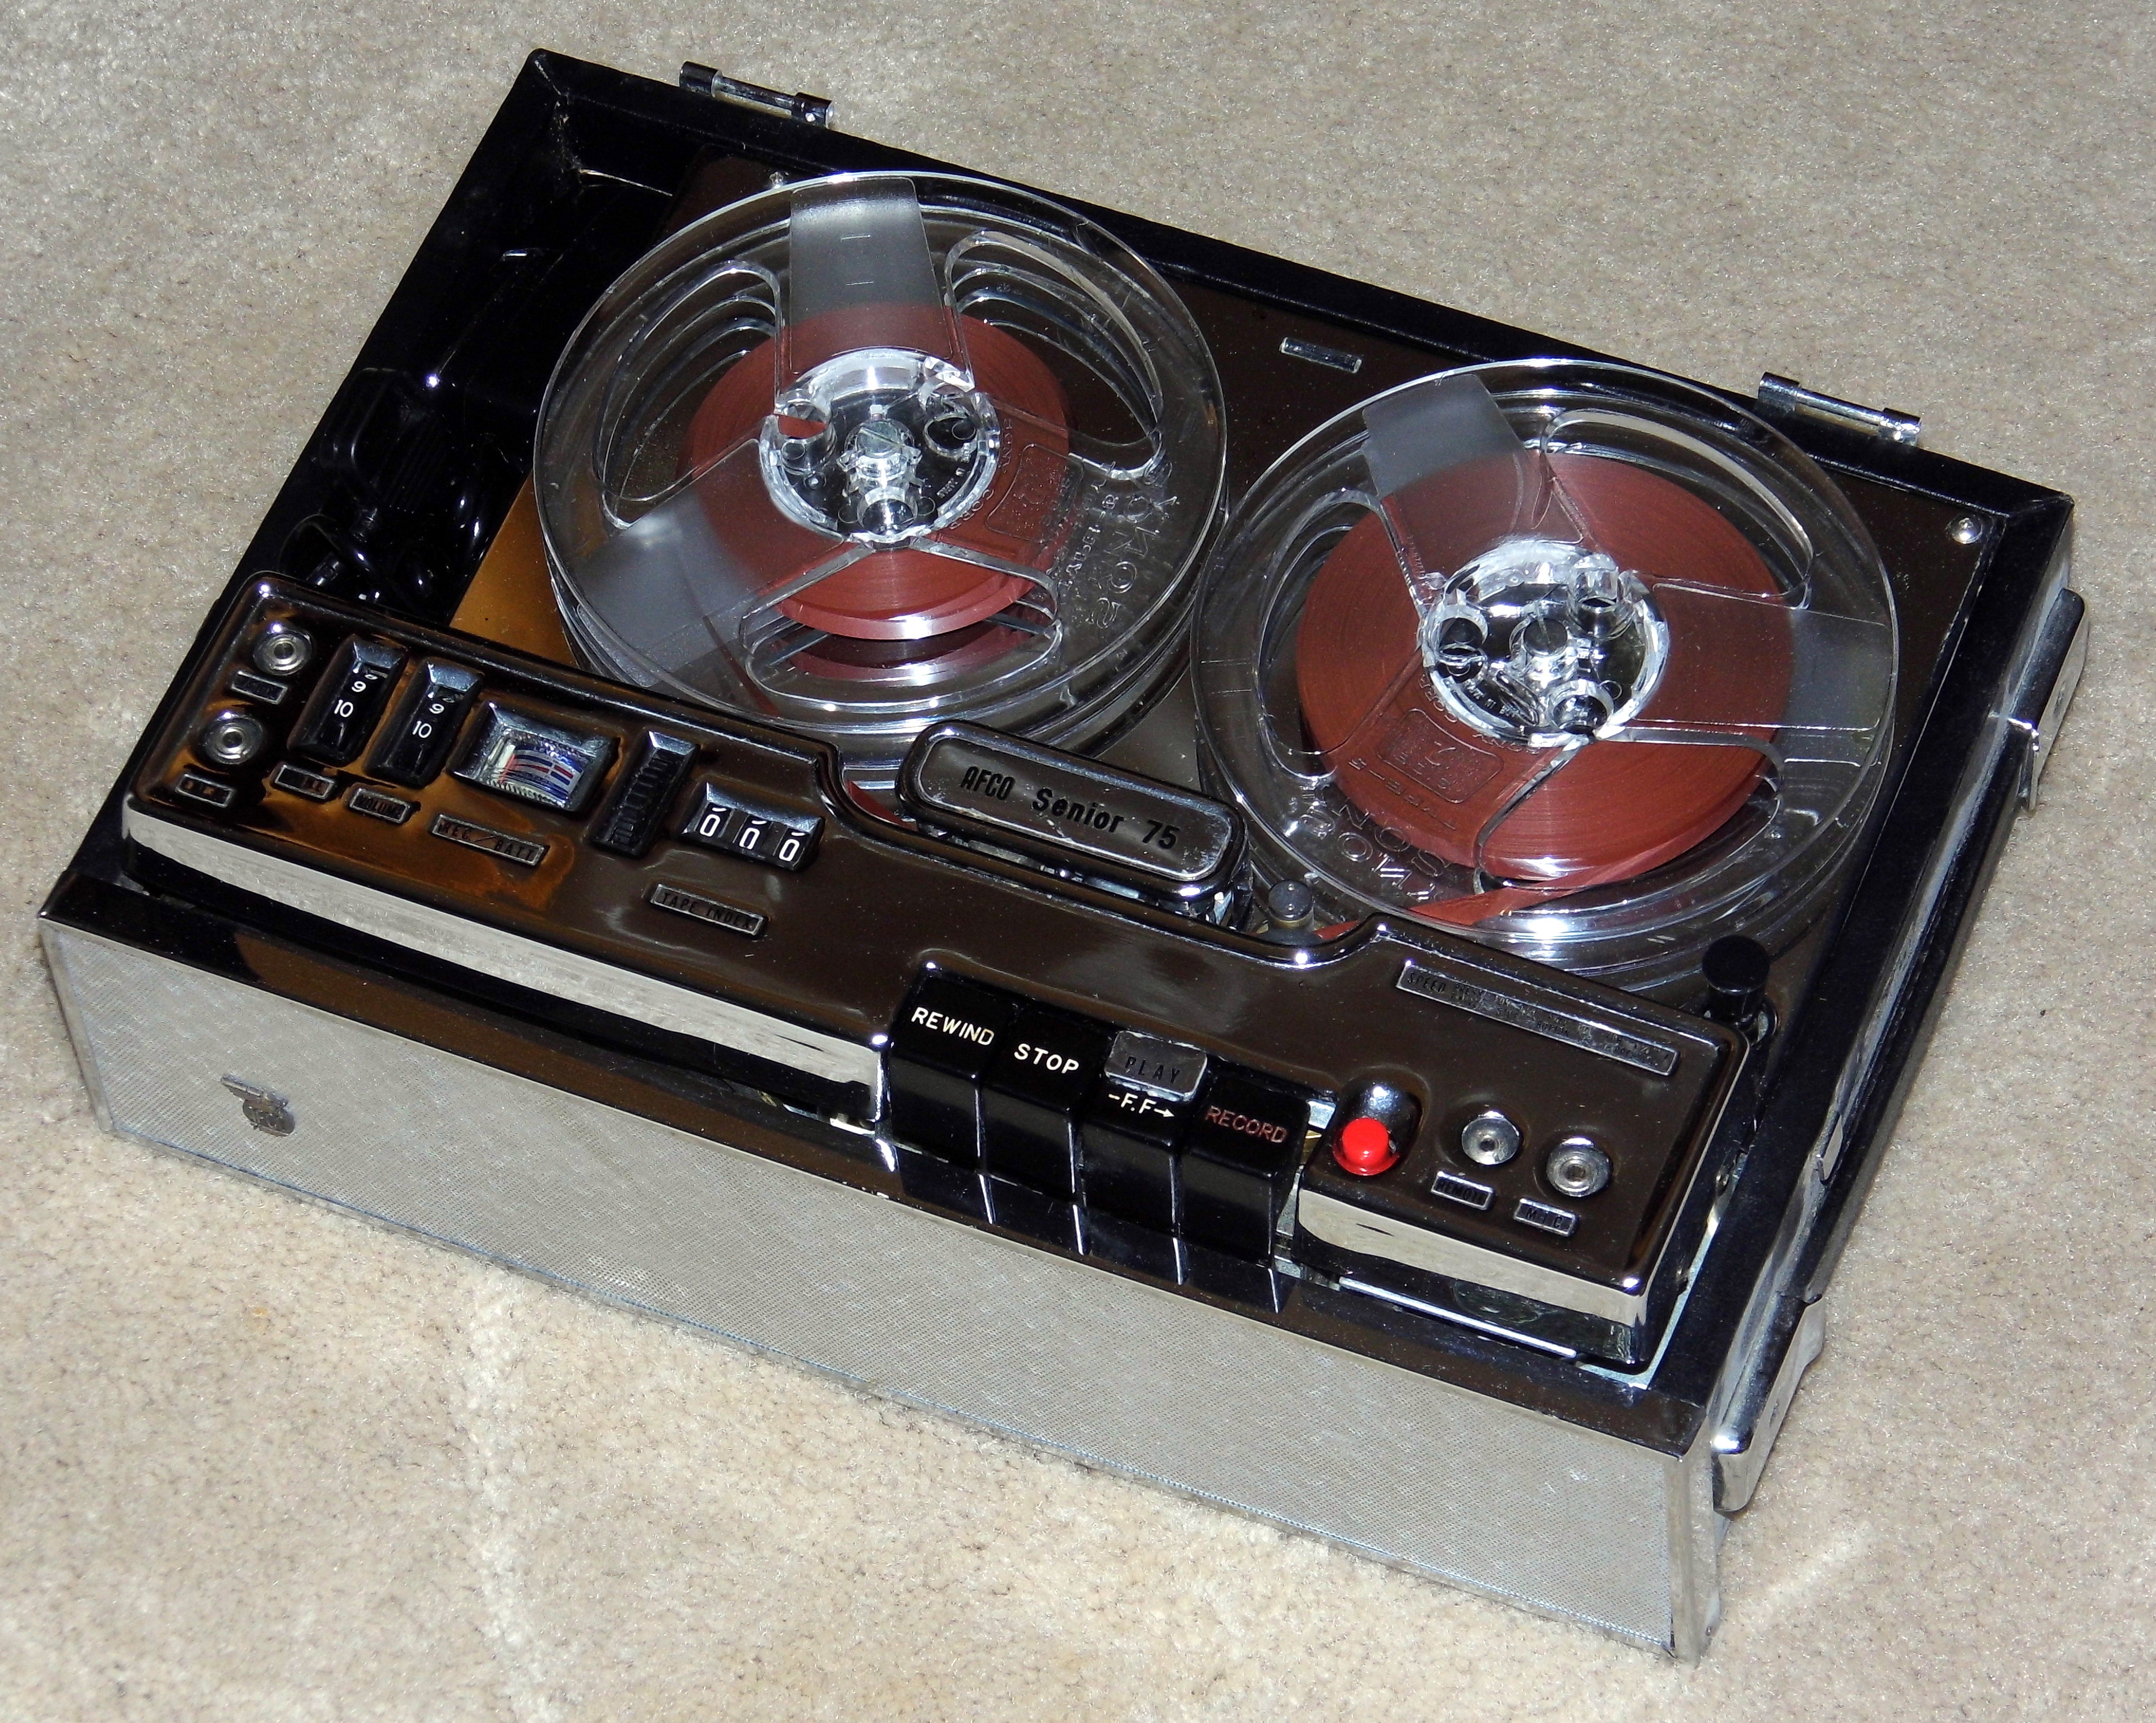 File:Vintage AFCO Senior 75 Reel-To-Reel Tape Recorder, Battery And AC  Power, Made In Japan (14146604475).jpg - Wikimedia Commons